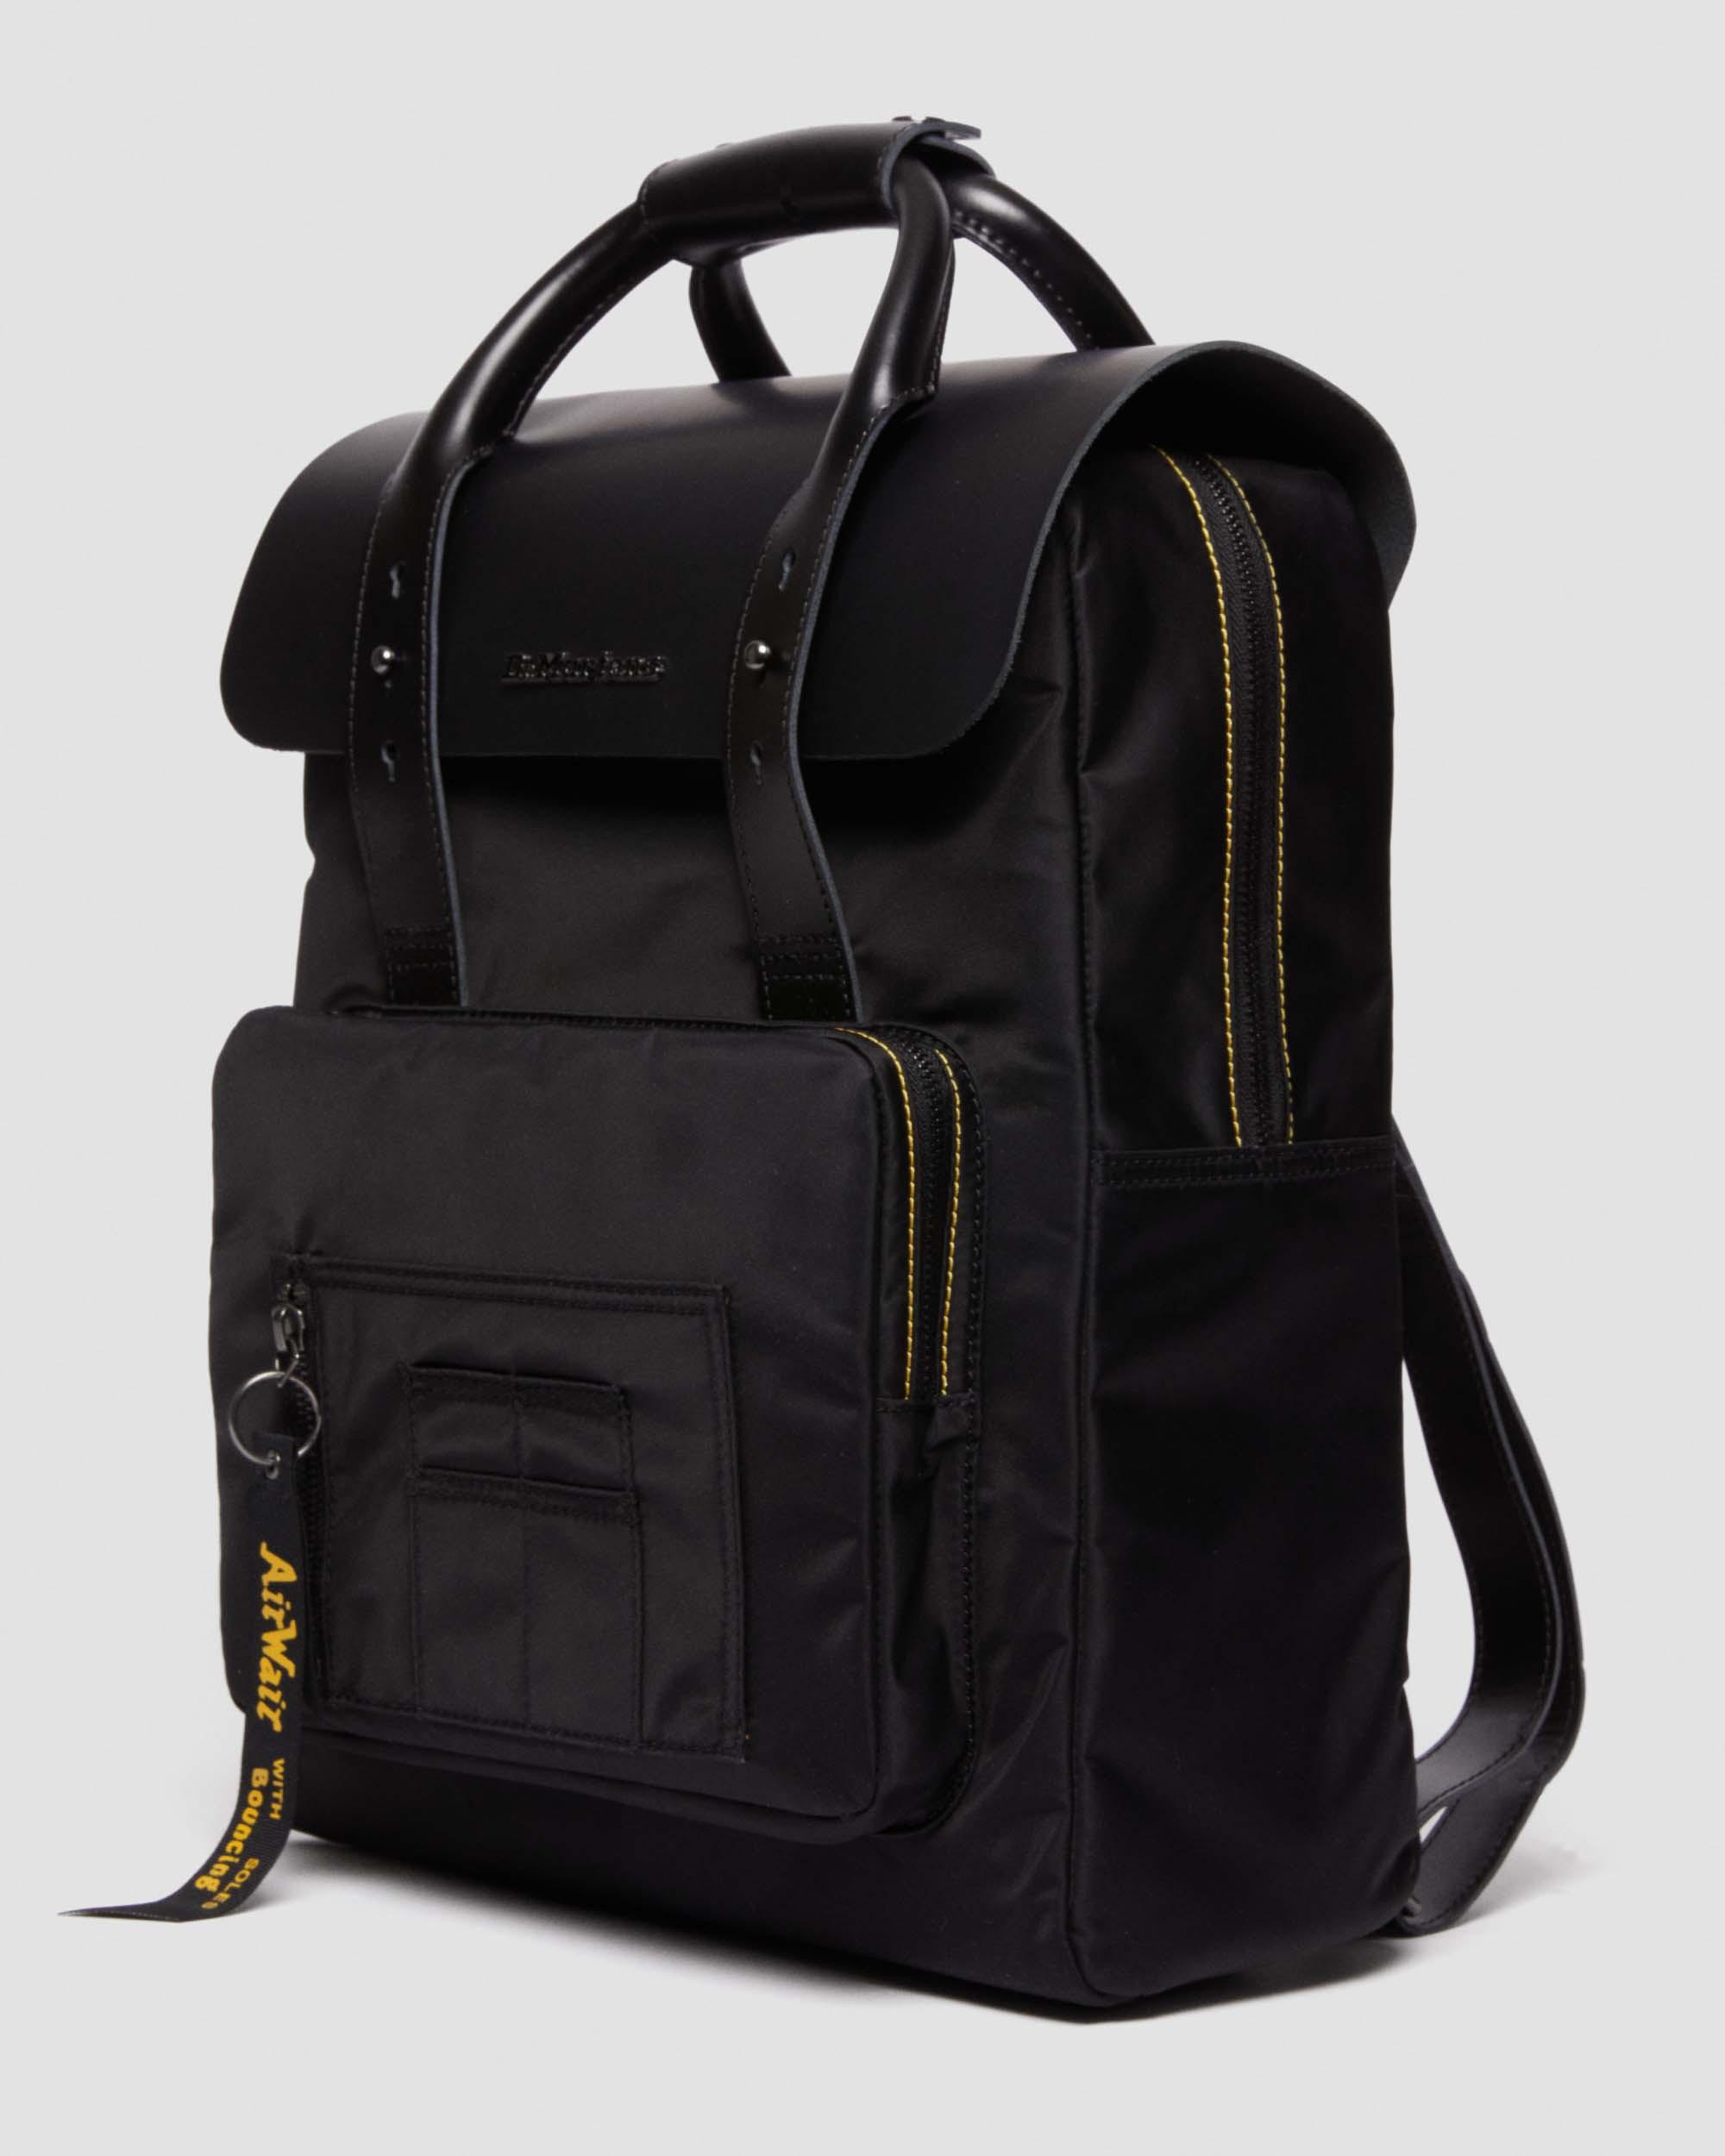 LITE ALPHA INDUSTRIES LEATHER & NYLON BACKPACK in Black